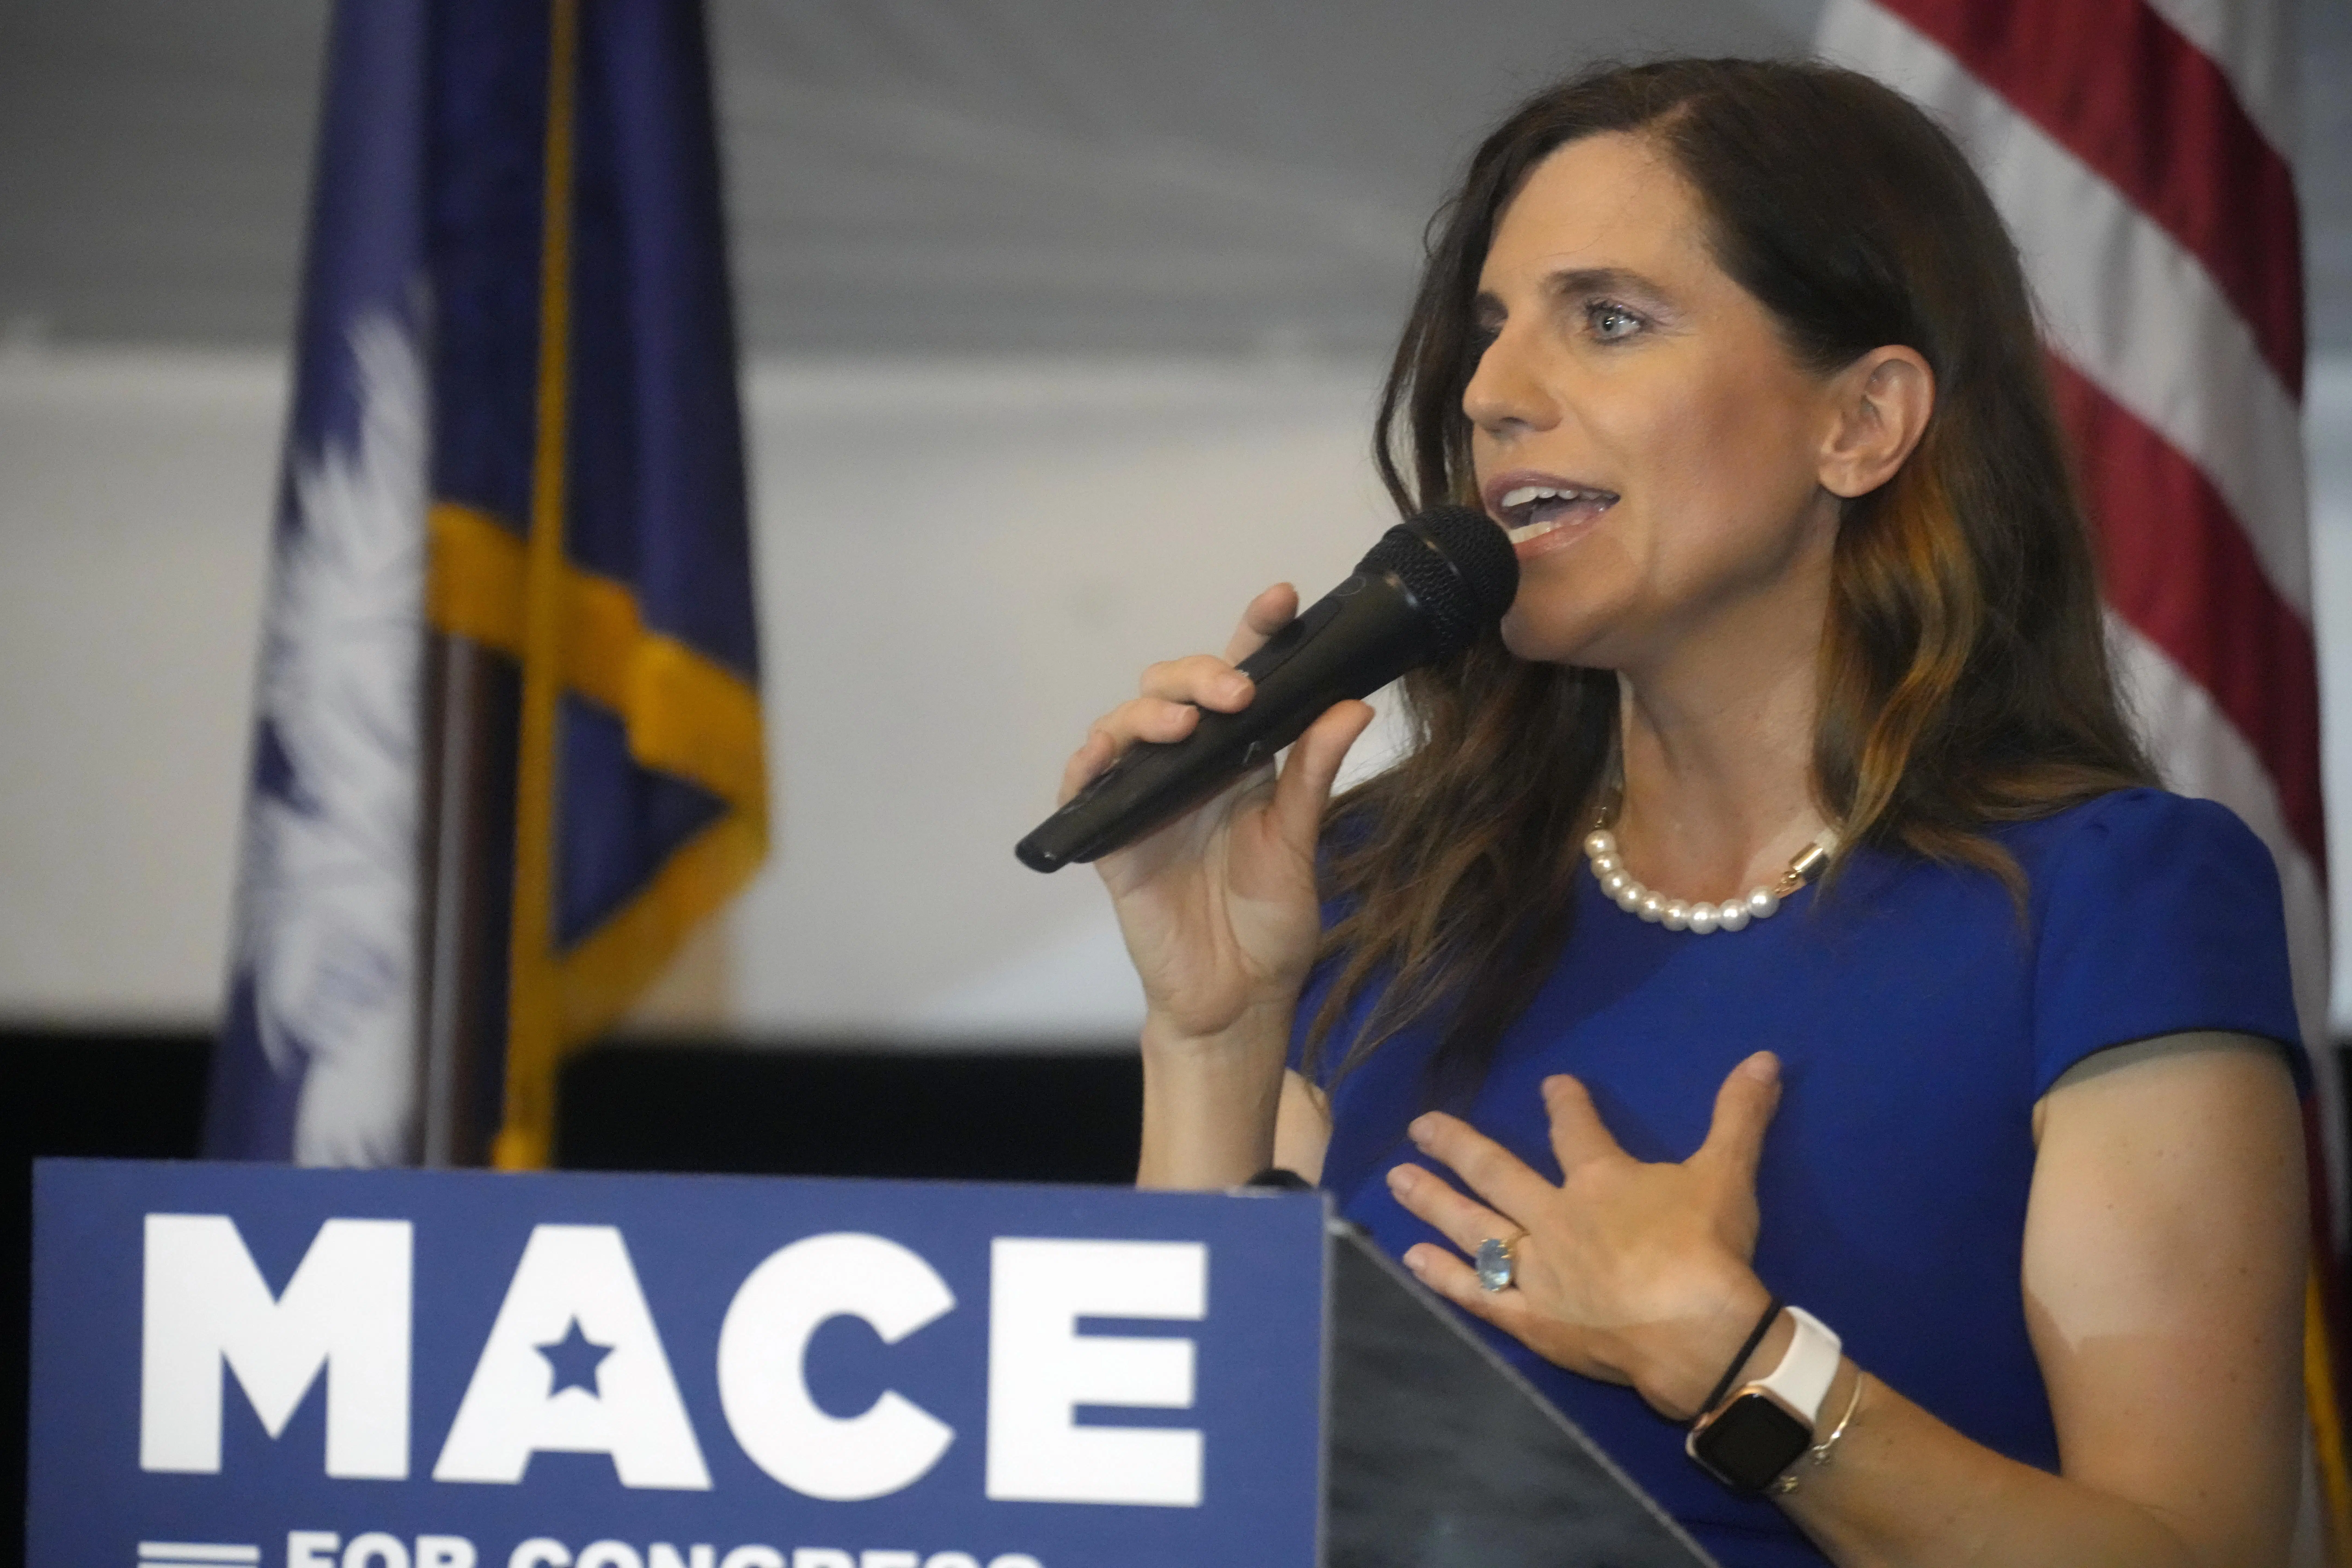 Rice Loses House Seat After Impeaching Trump; Mace Holds On